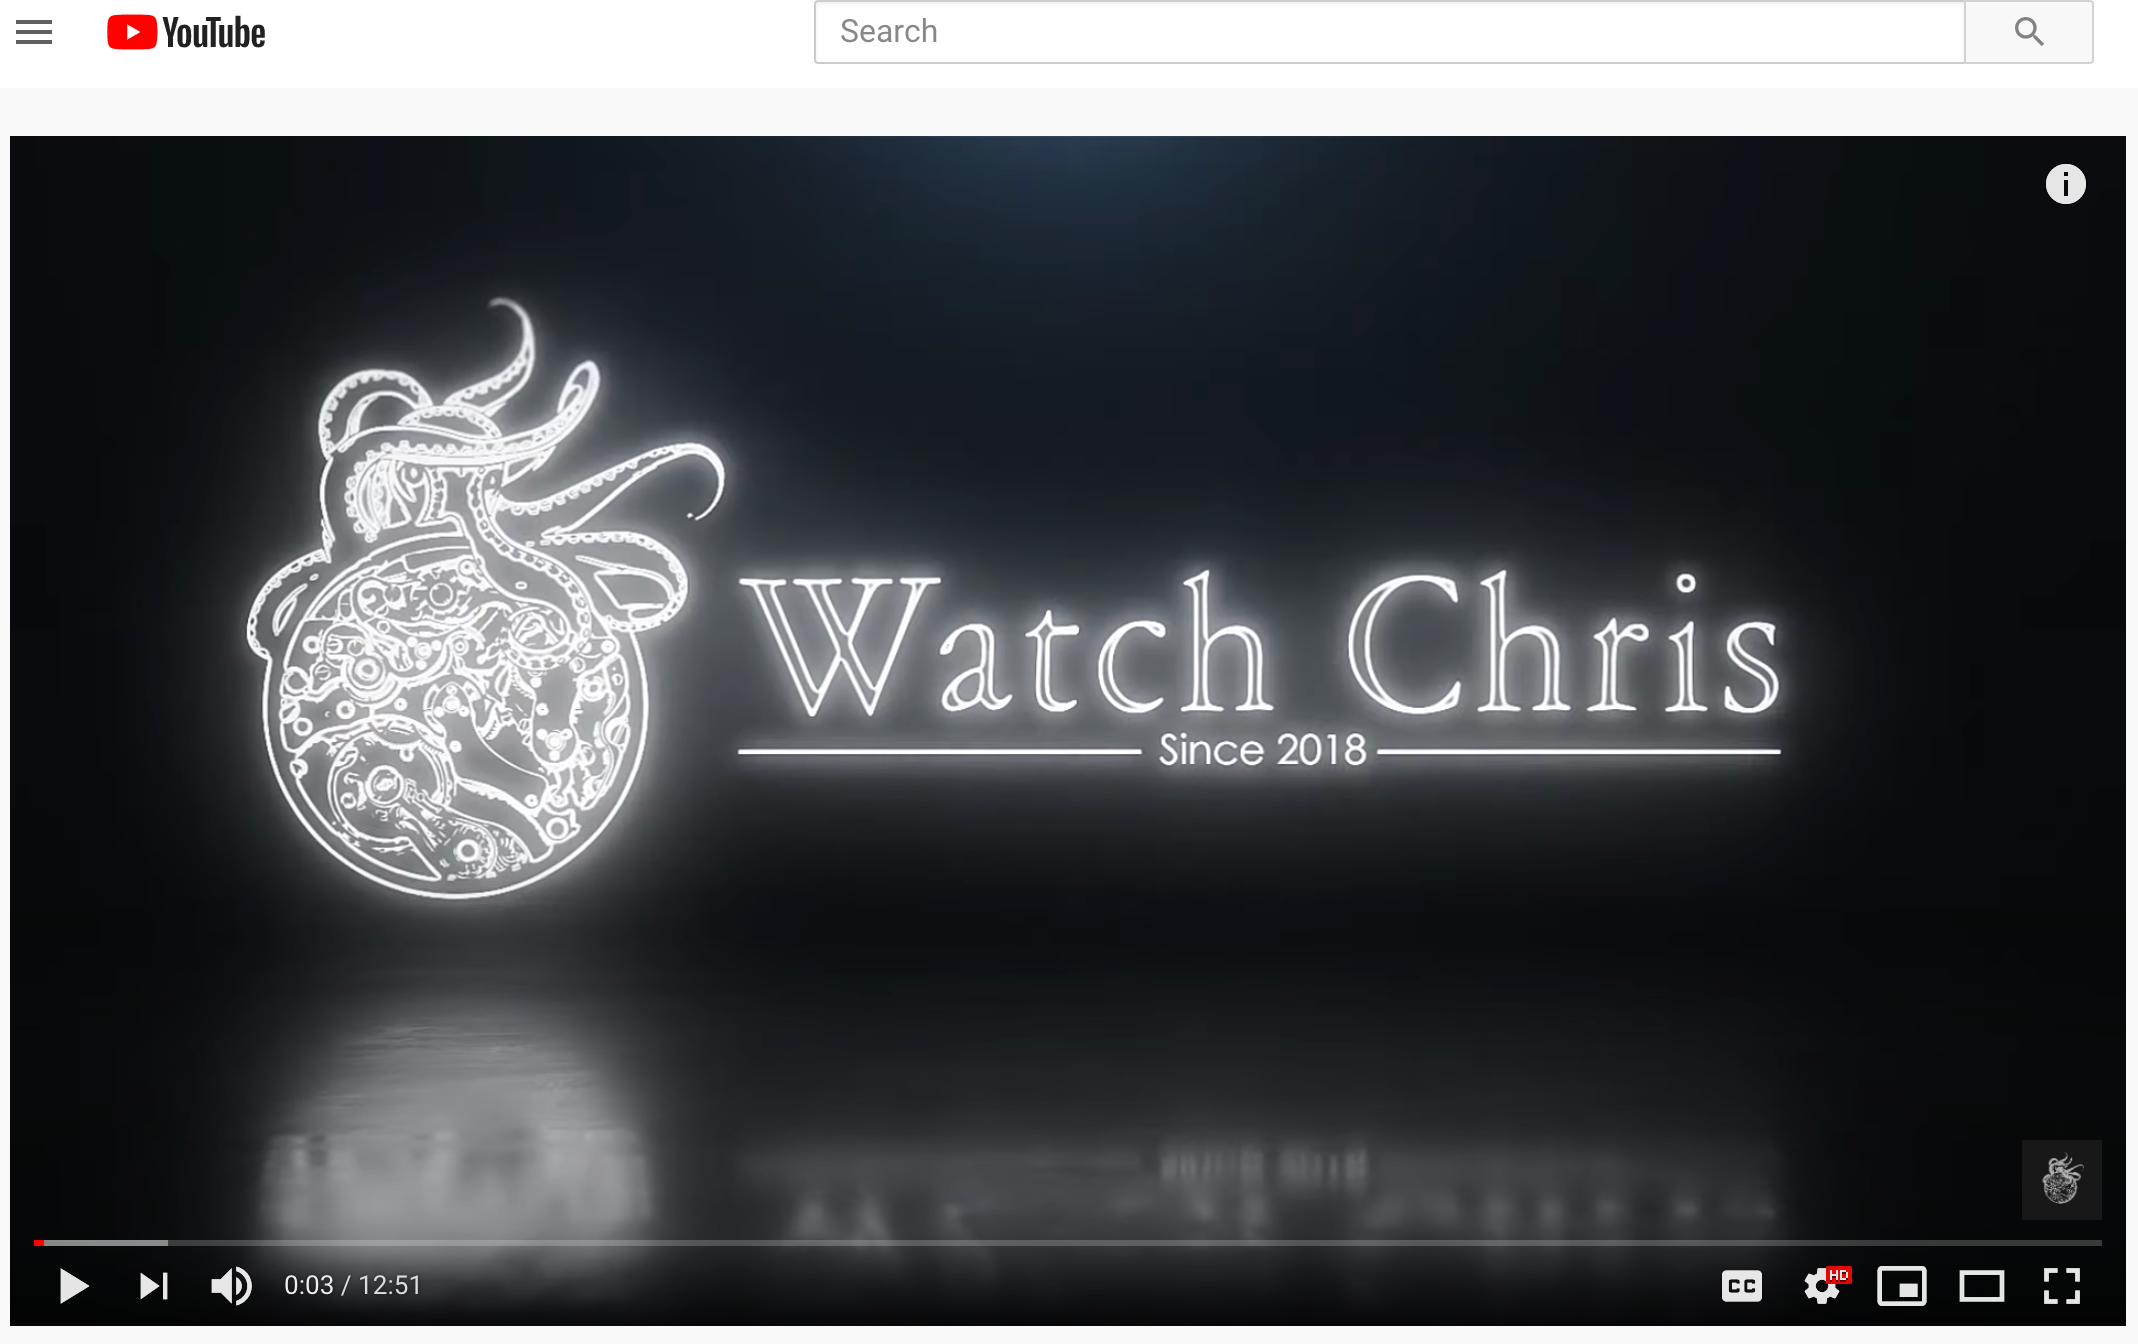 Reviewed on Watch Chris